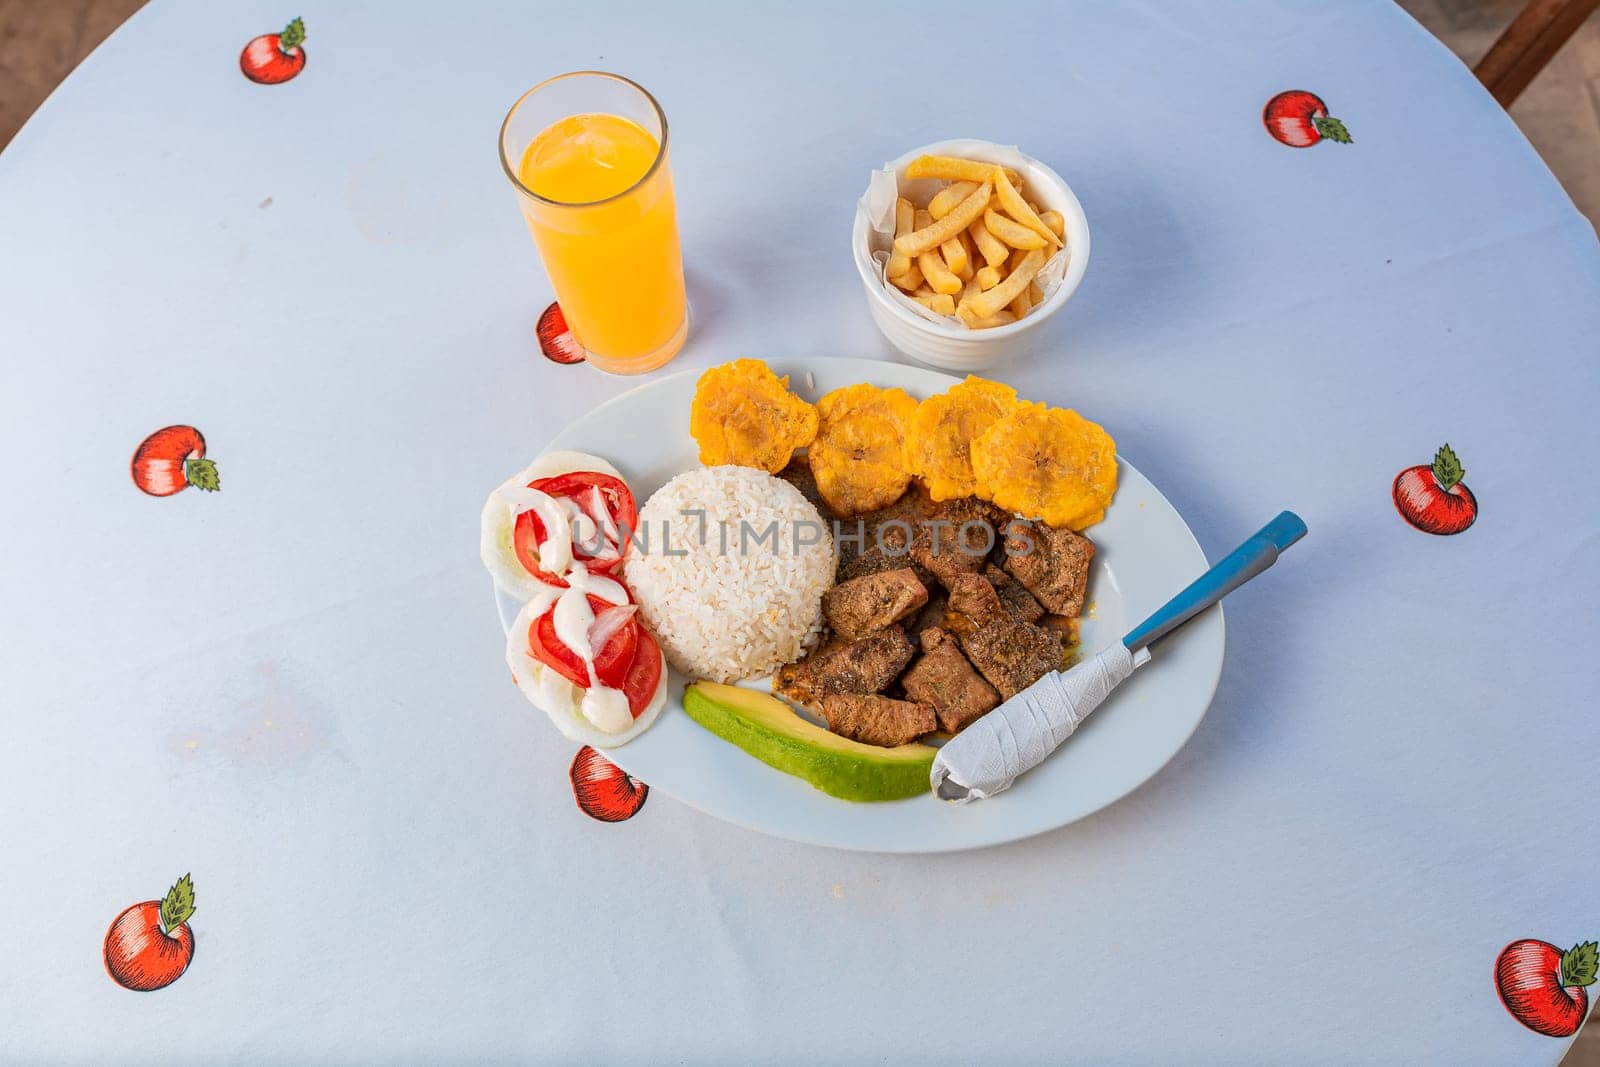 Tradicional lunch served at the table. Top view of traditional lunch with orange juice on the table. by isaiphoto